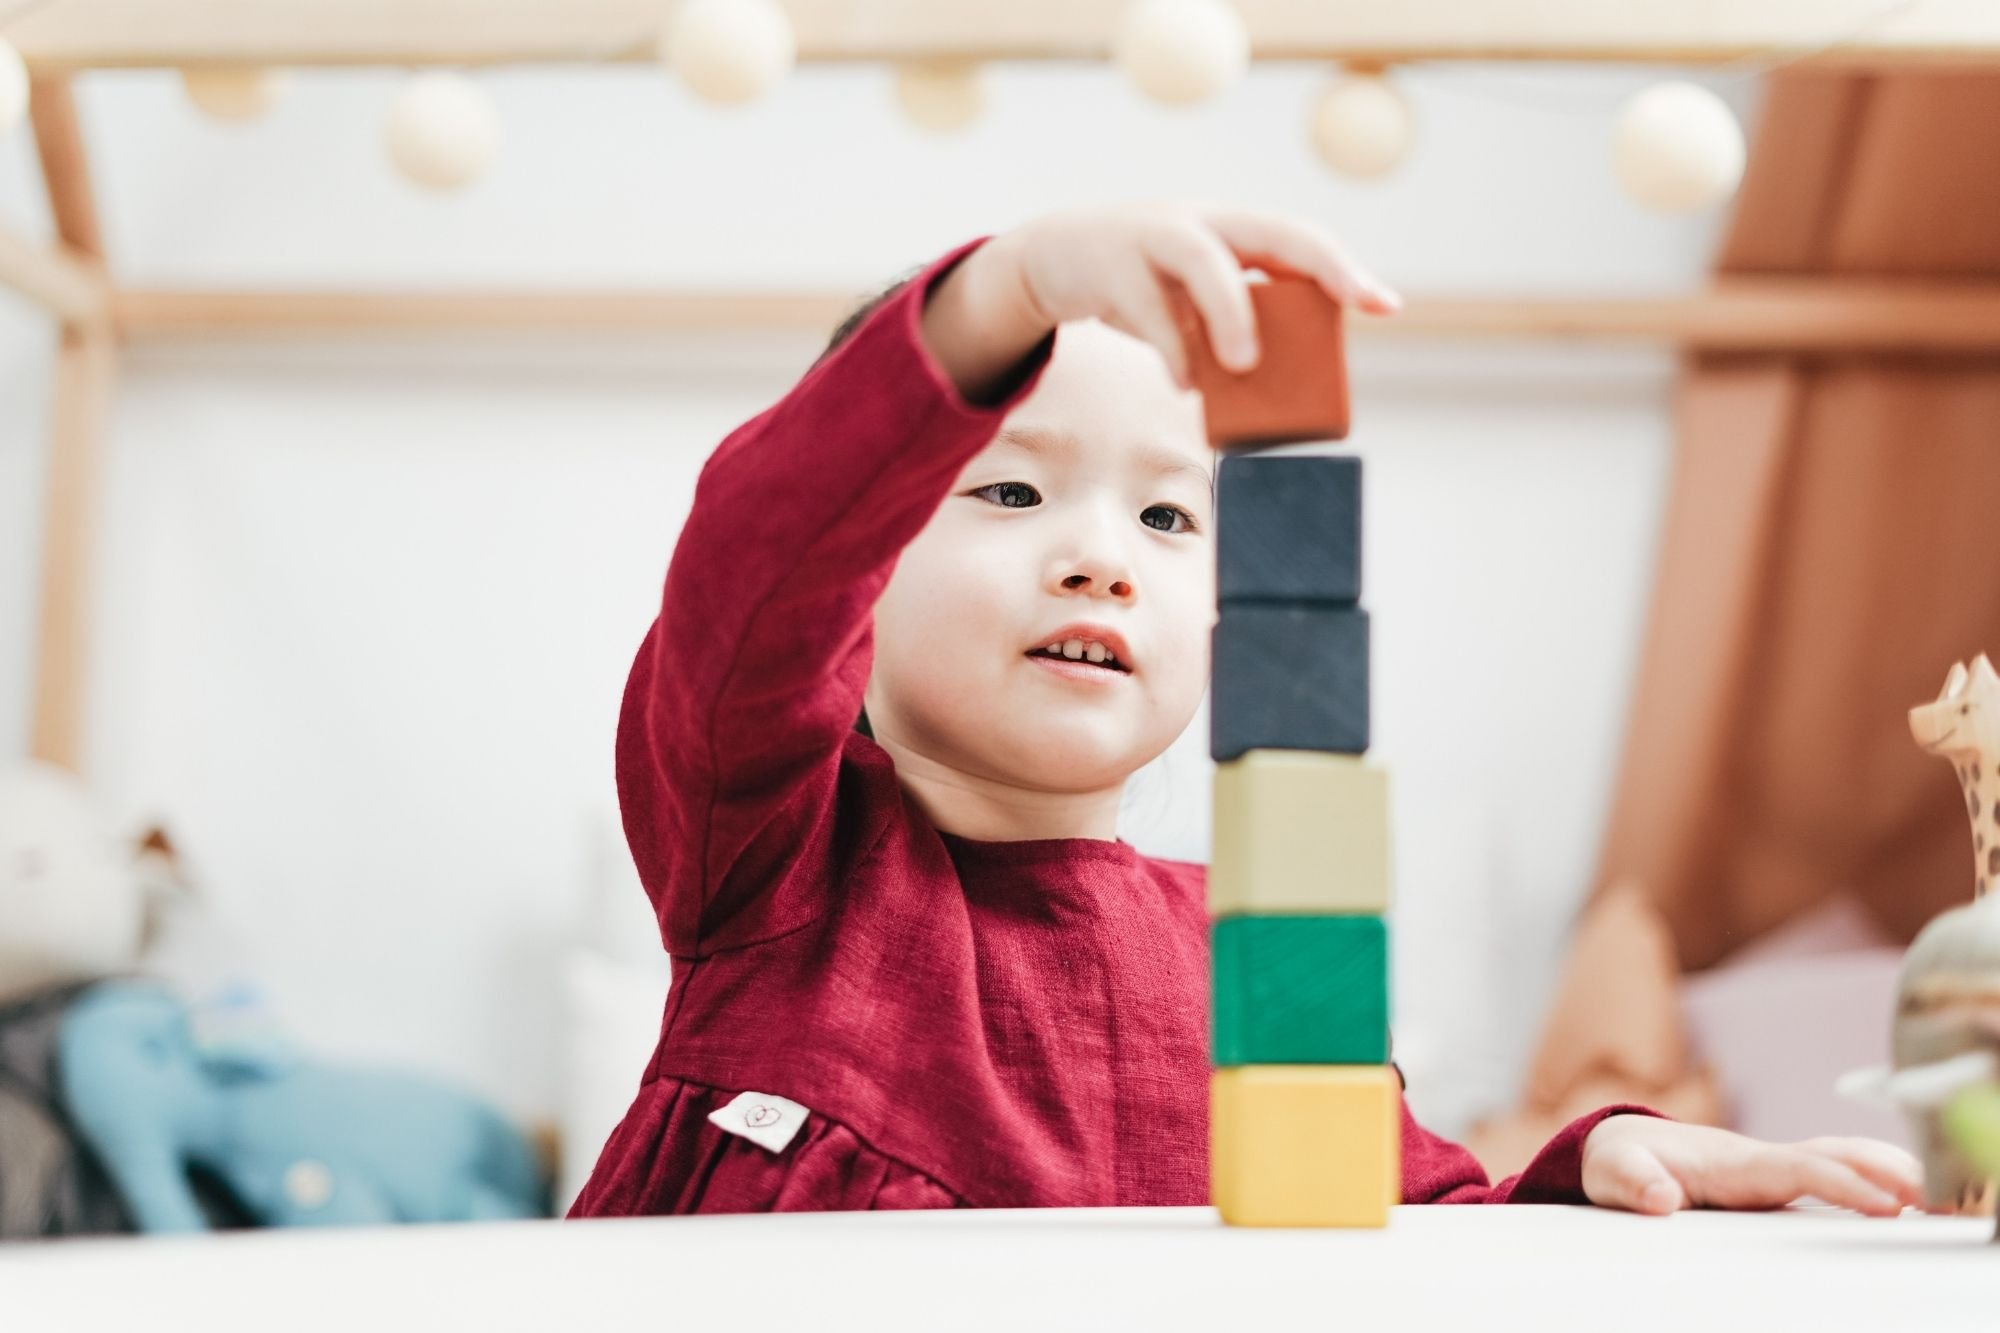 Child building a tower with colourful bricks 